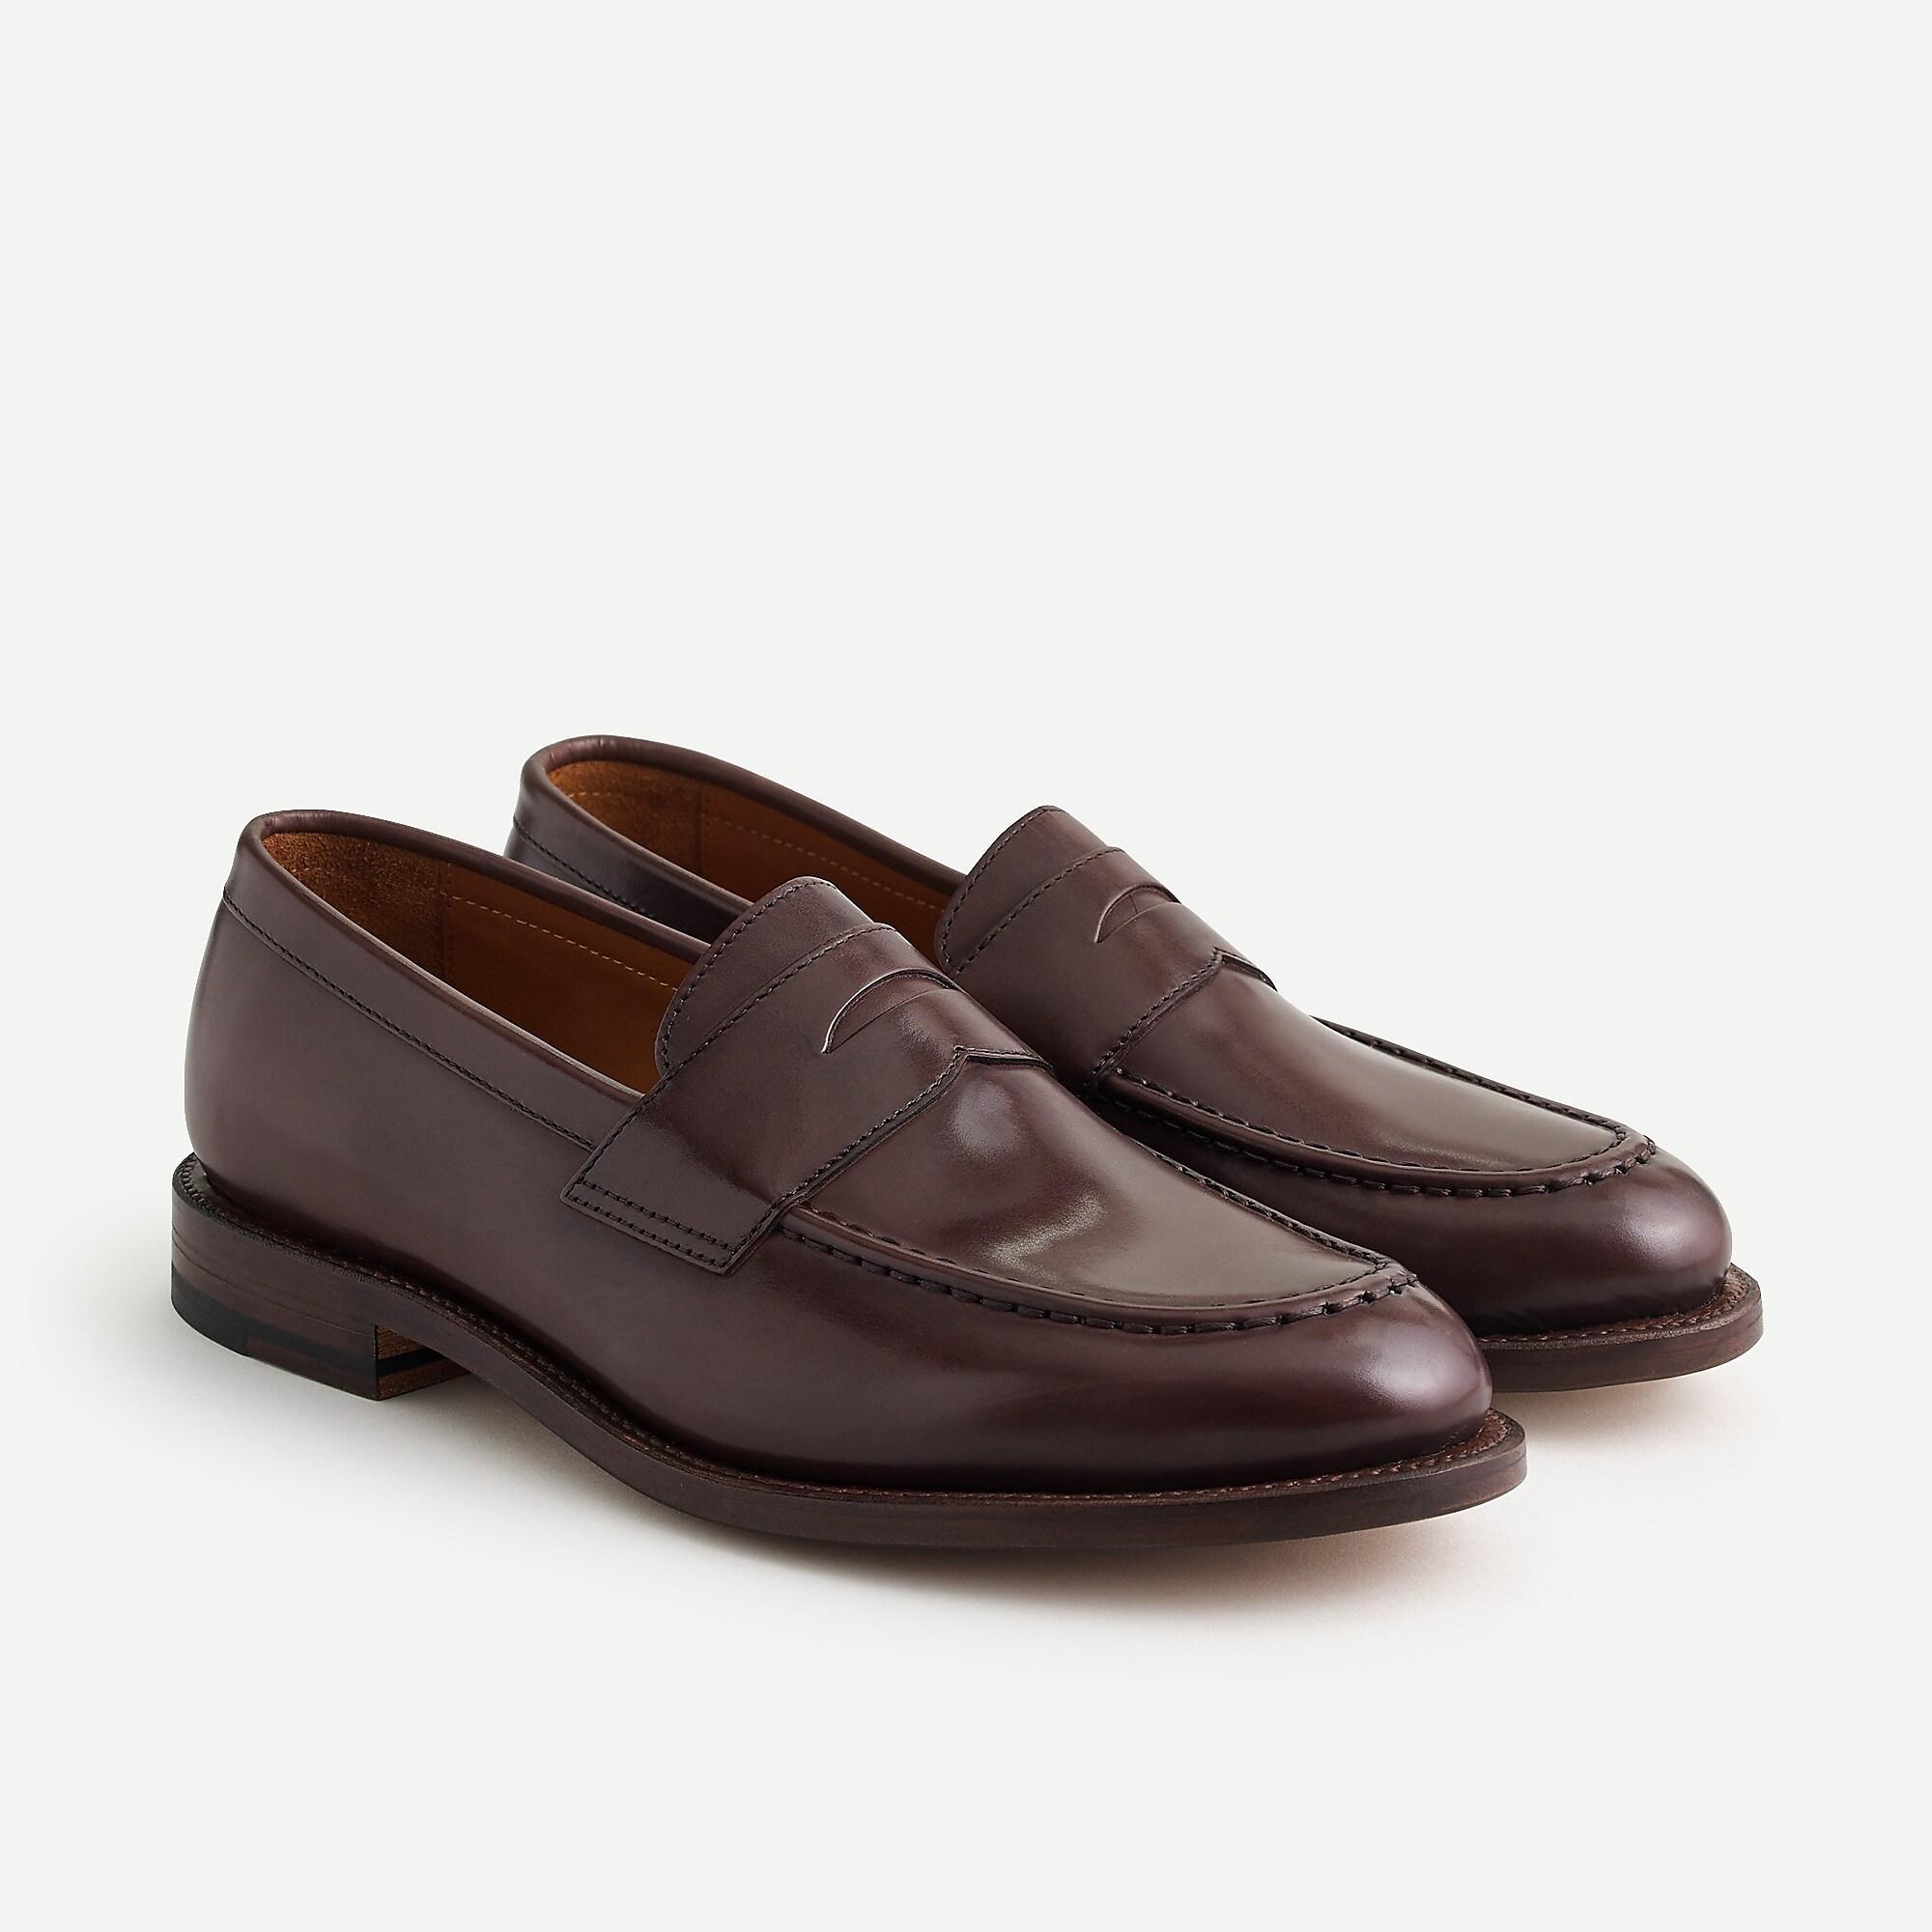 J Crew Penny Loafers - www.inf-inet.com